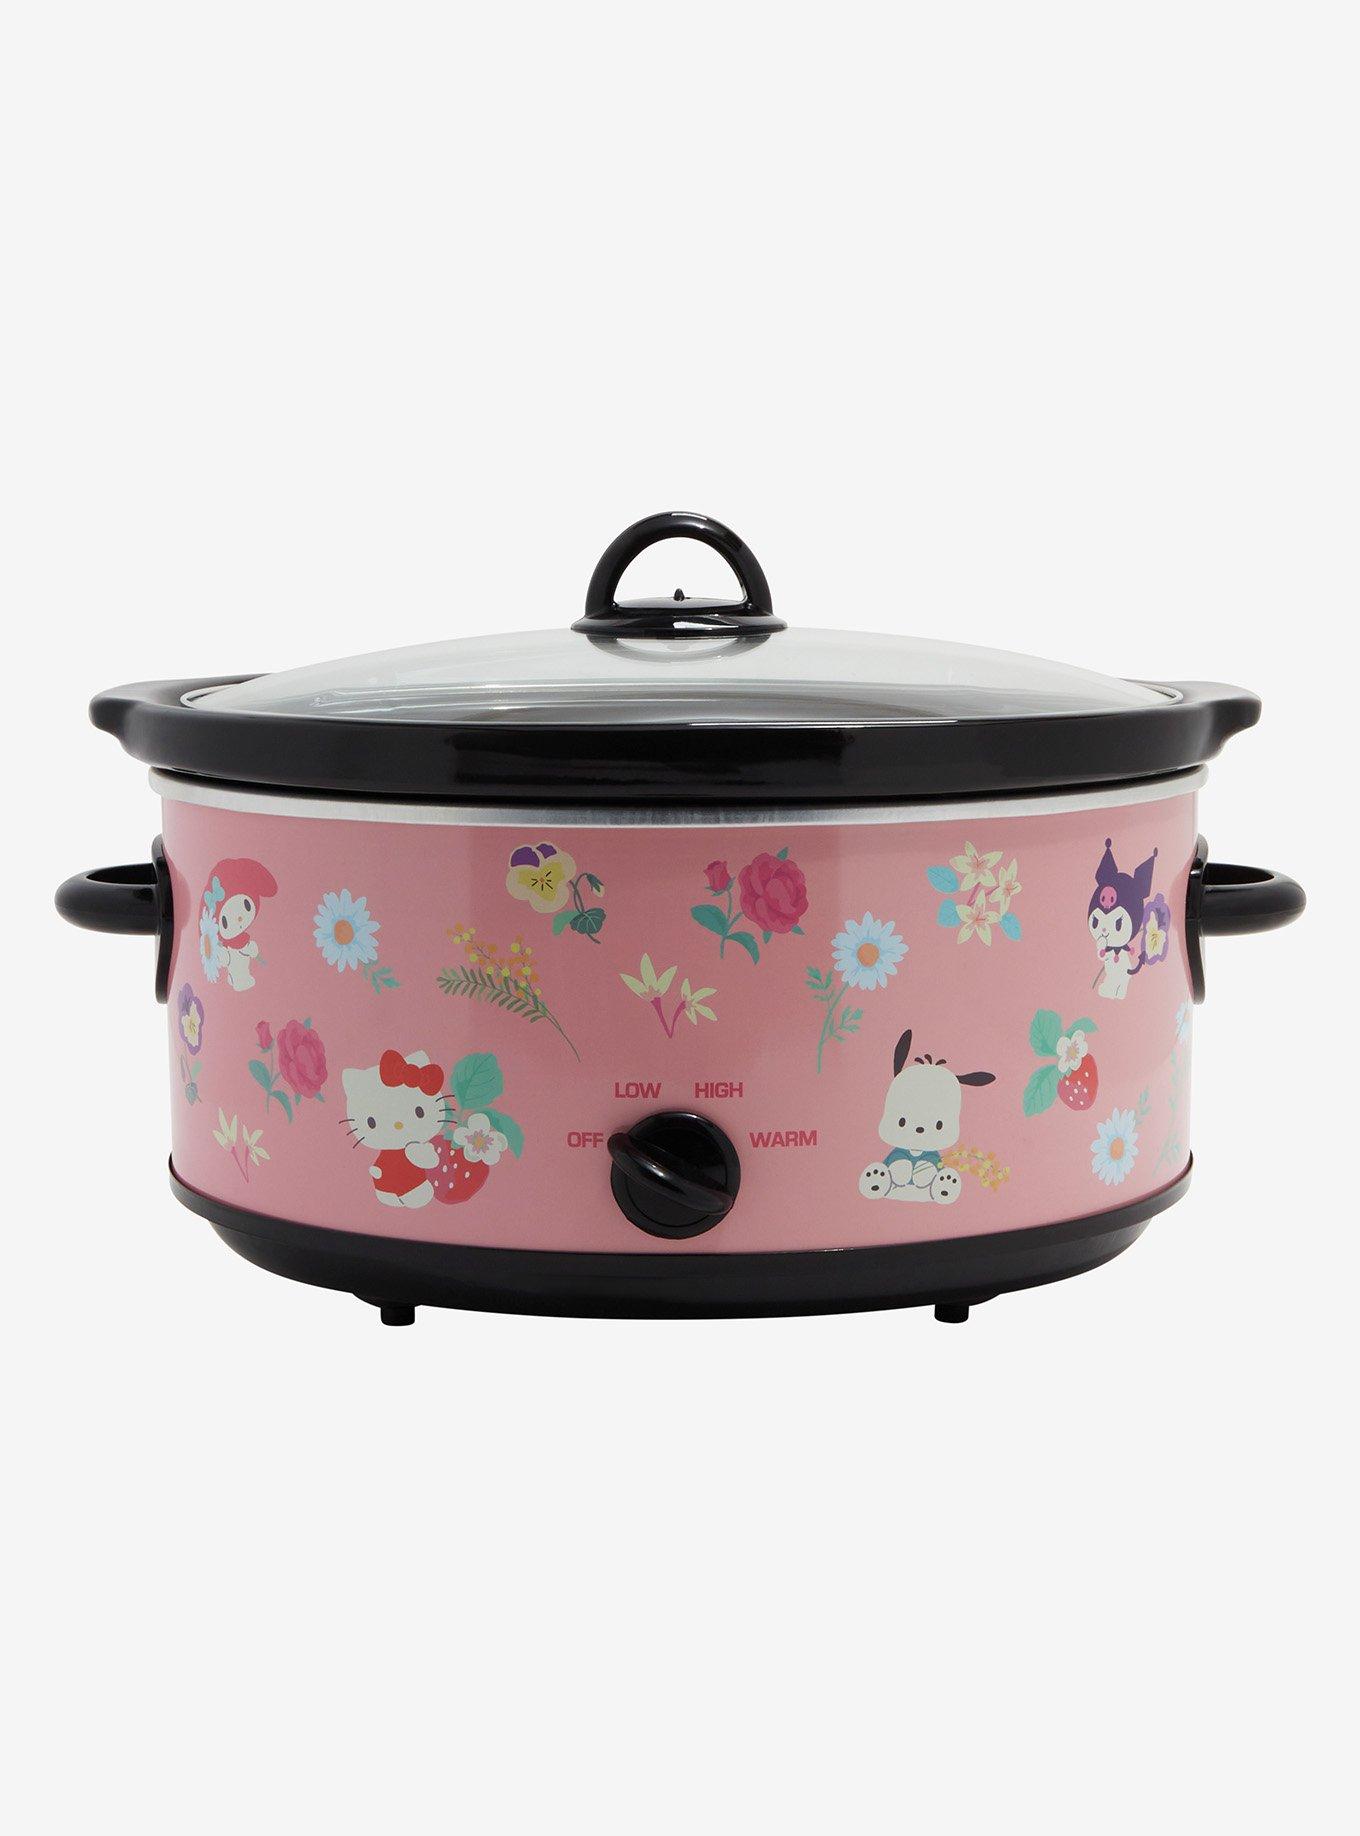 Sanrio Hello Kitty Very Delicious 7-Quart Slow Cooker - BoxLunch Exclusive